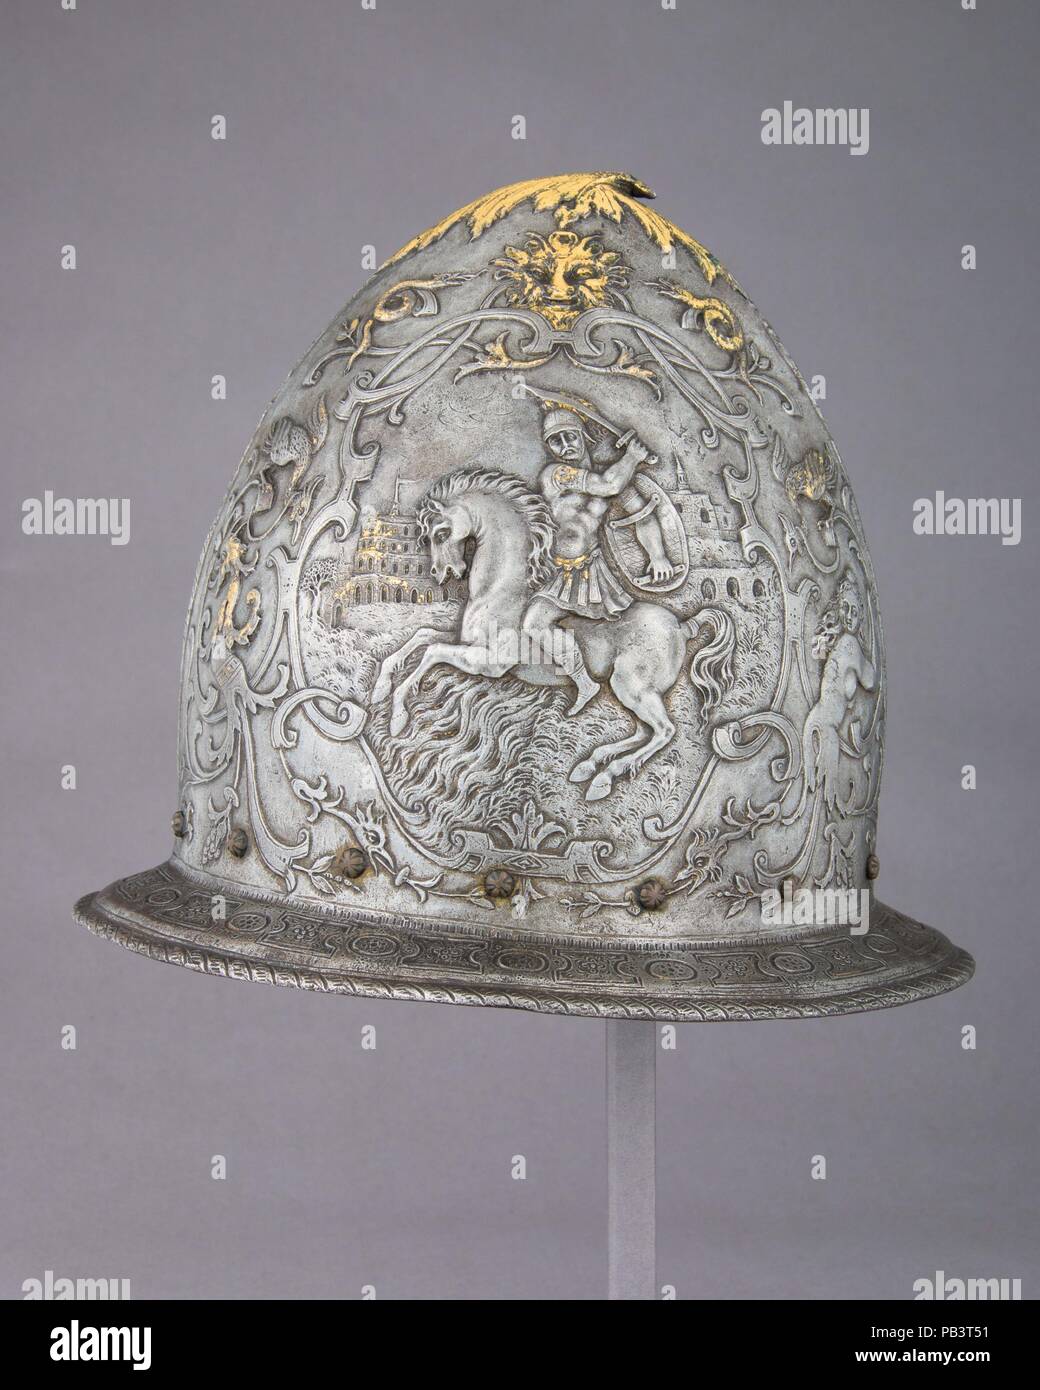 Cabasset in Late 16th Century French Style. Culture: French. Dimensions: H. 8 3/4 in. (22.2 cm); W. 8 1/2 in. (21.6 cm); D. 10 in. (25.4 cm); Wt. 3 lb. 8 oz. (1600 g). Date: ca. 1870. Museum: Metropolitan Museum of Art, New York, USA. Stock Photo